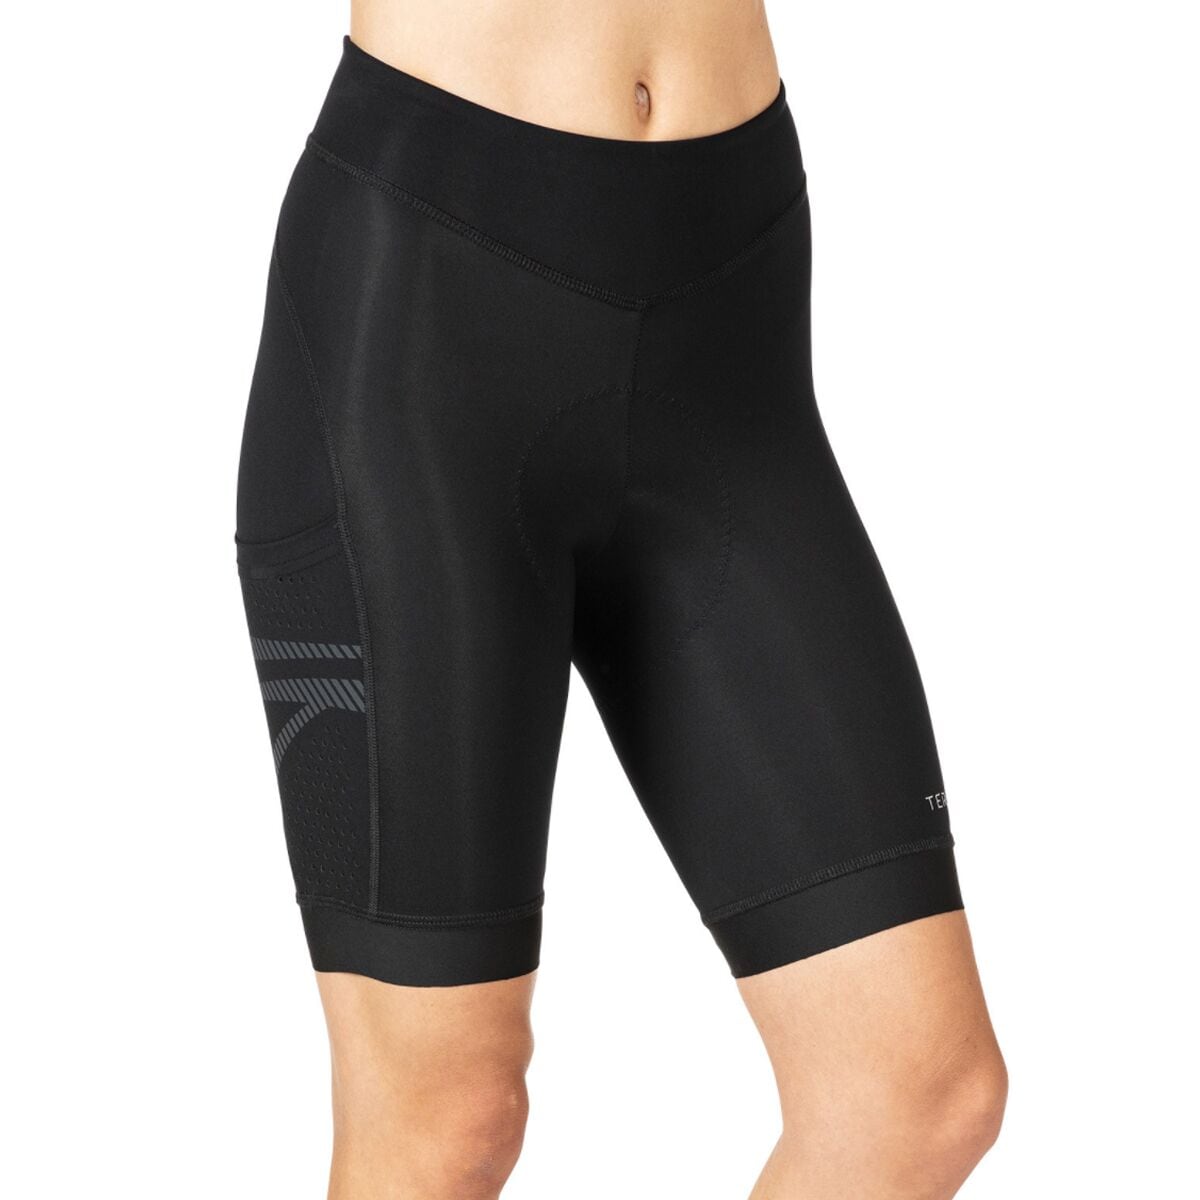 Terry Bicycles Power Short - Women's Black, S